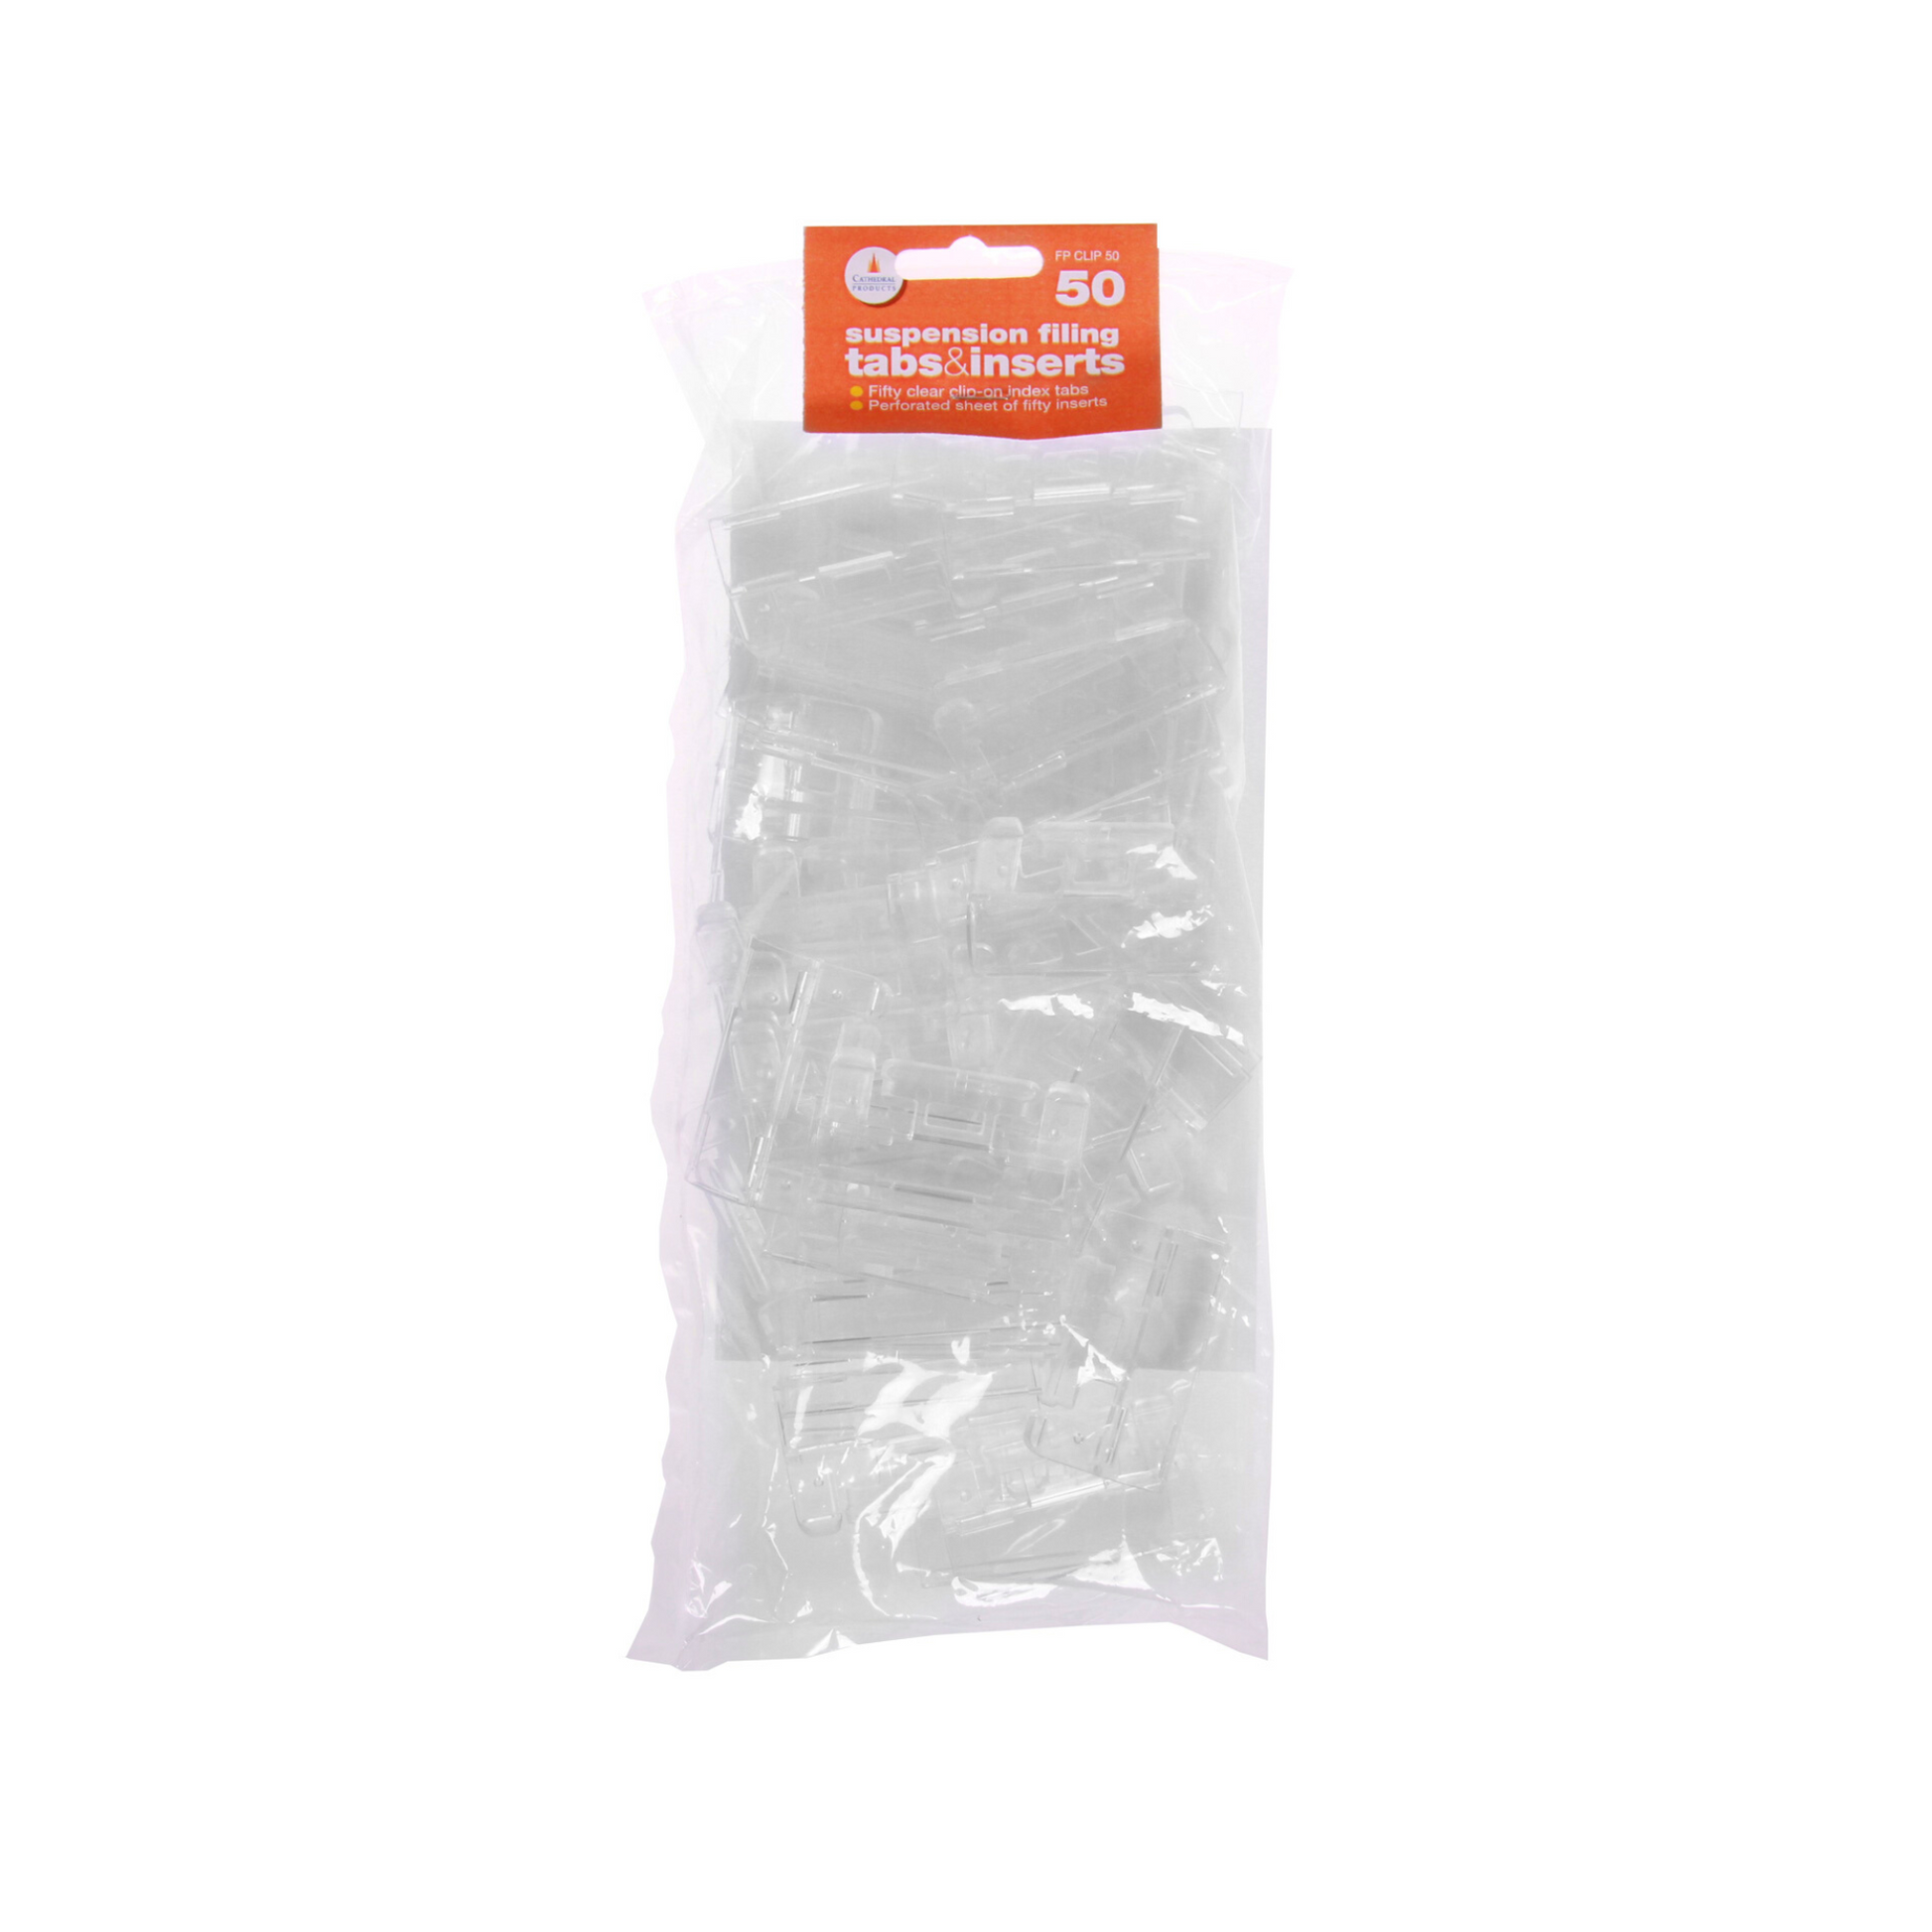 Packaging of Cathedral Products suspension filing tabs and inserts, containing fifty clear clip-on index tabs and a perforated sheet of fifty inserts. The packaging is orange and white with product information and branding displayed.